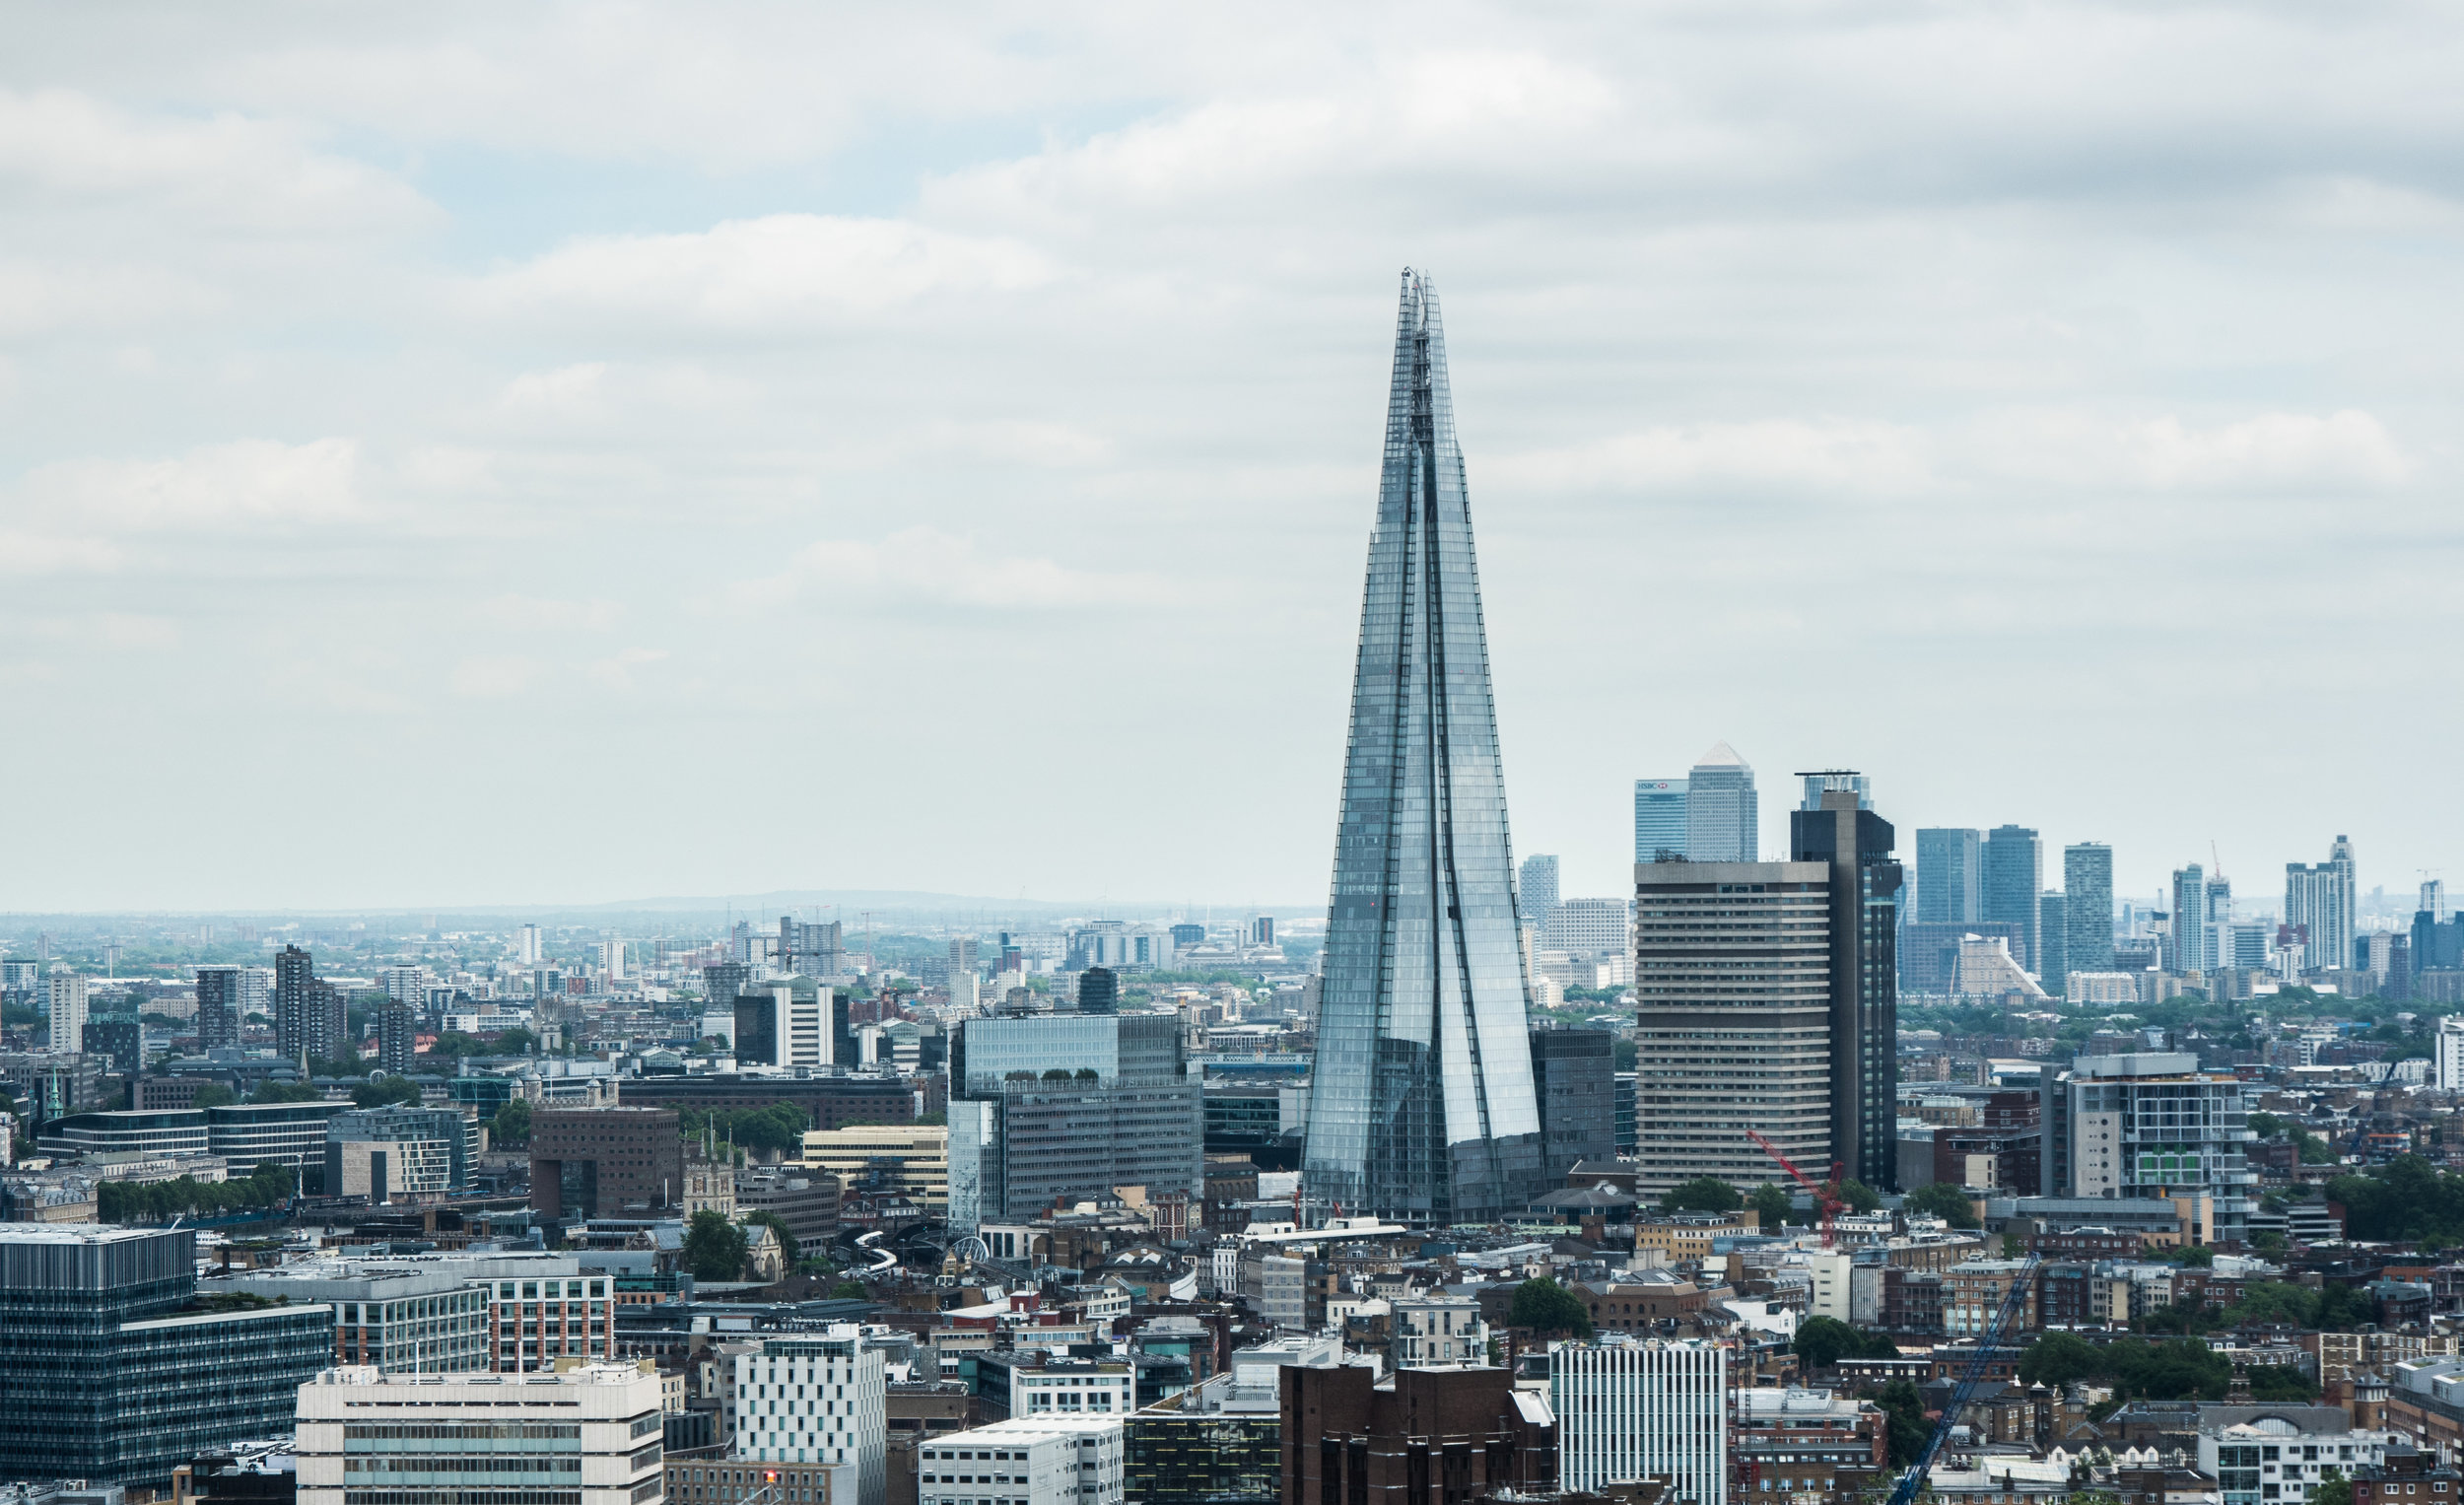 Renting an Office in London - The process of setting up or moving office can be complex, time-consuming and highly demanding. Partner with SAVVI for full market & service coverage so that you can focus on your core business.